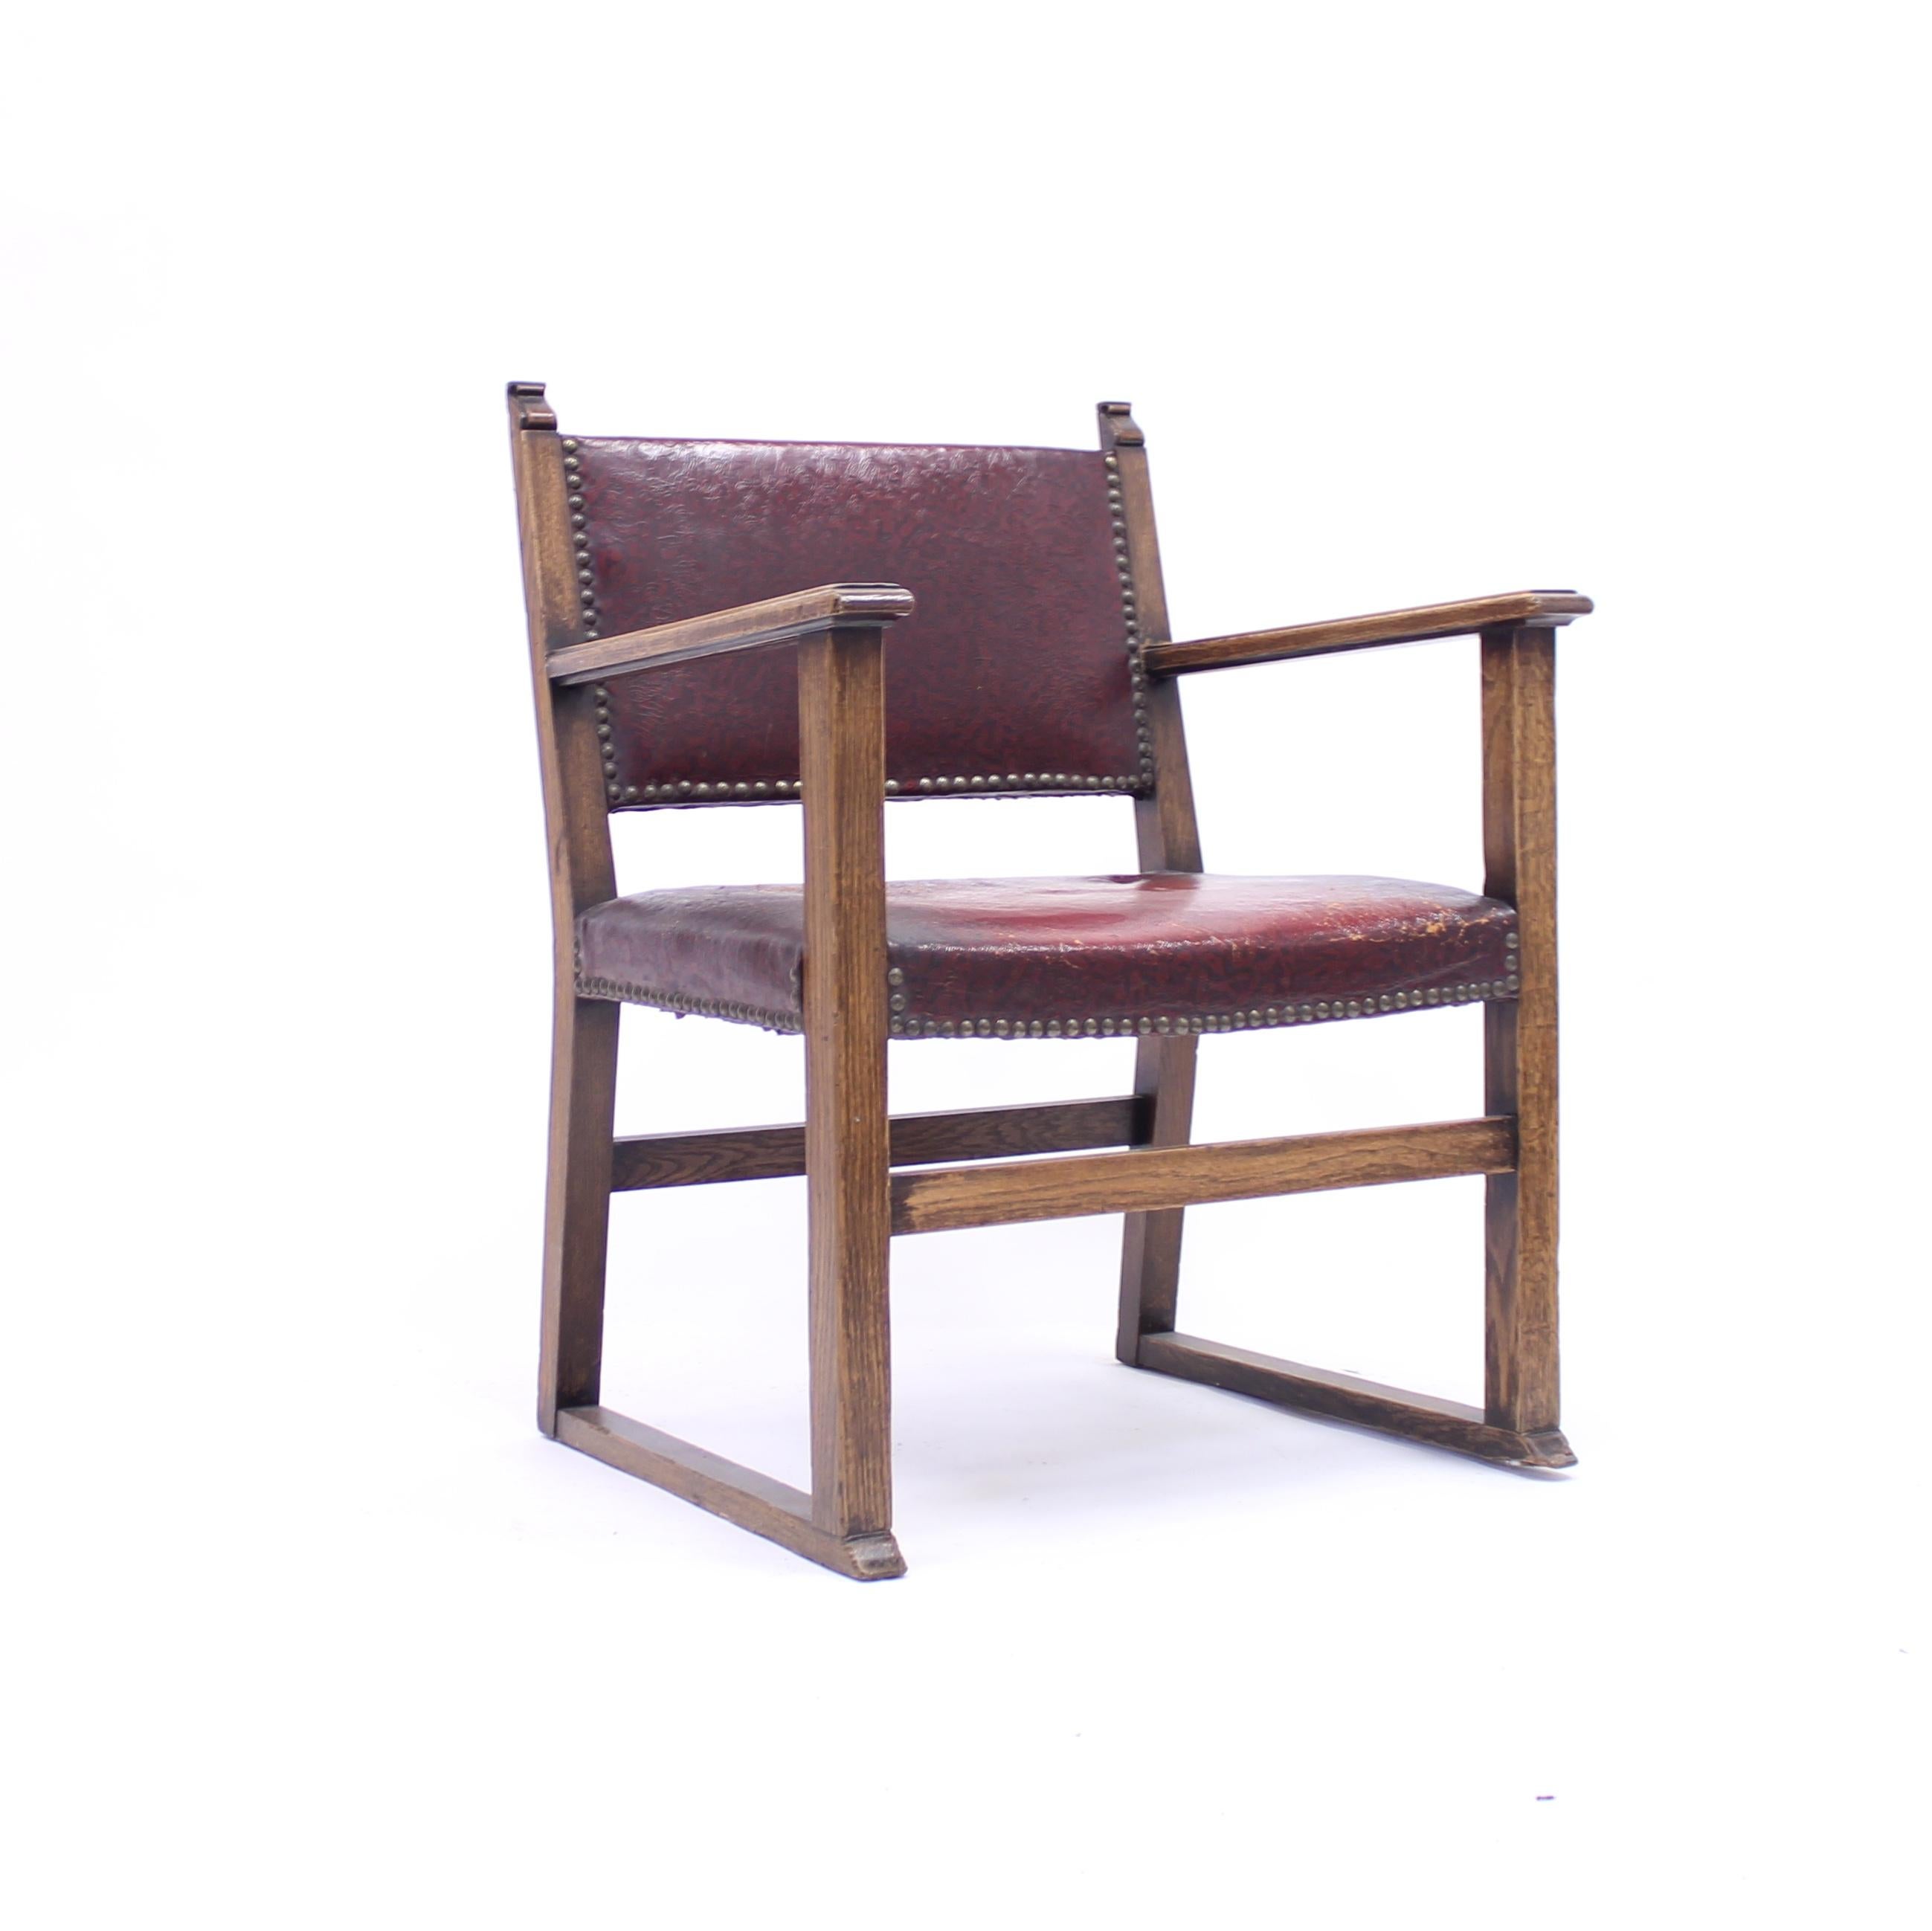 Art Deco Oak Fireside Chair Attributed to Adolf Loos, 1930s For Sale